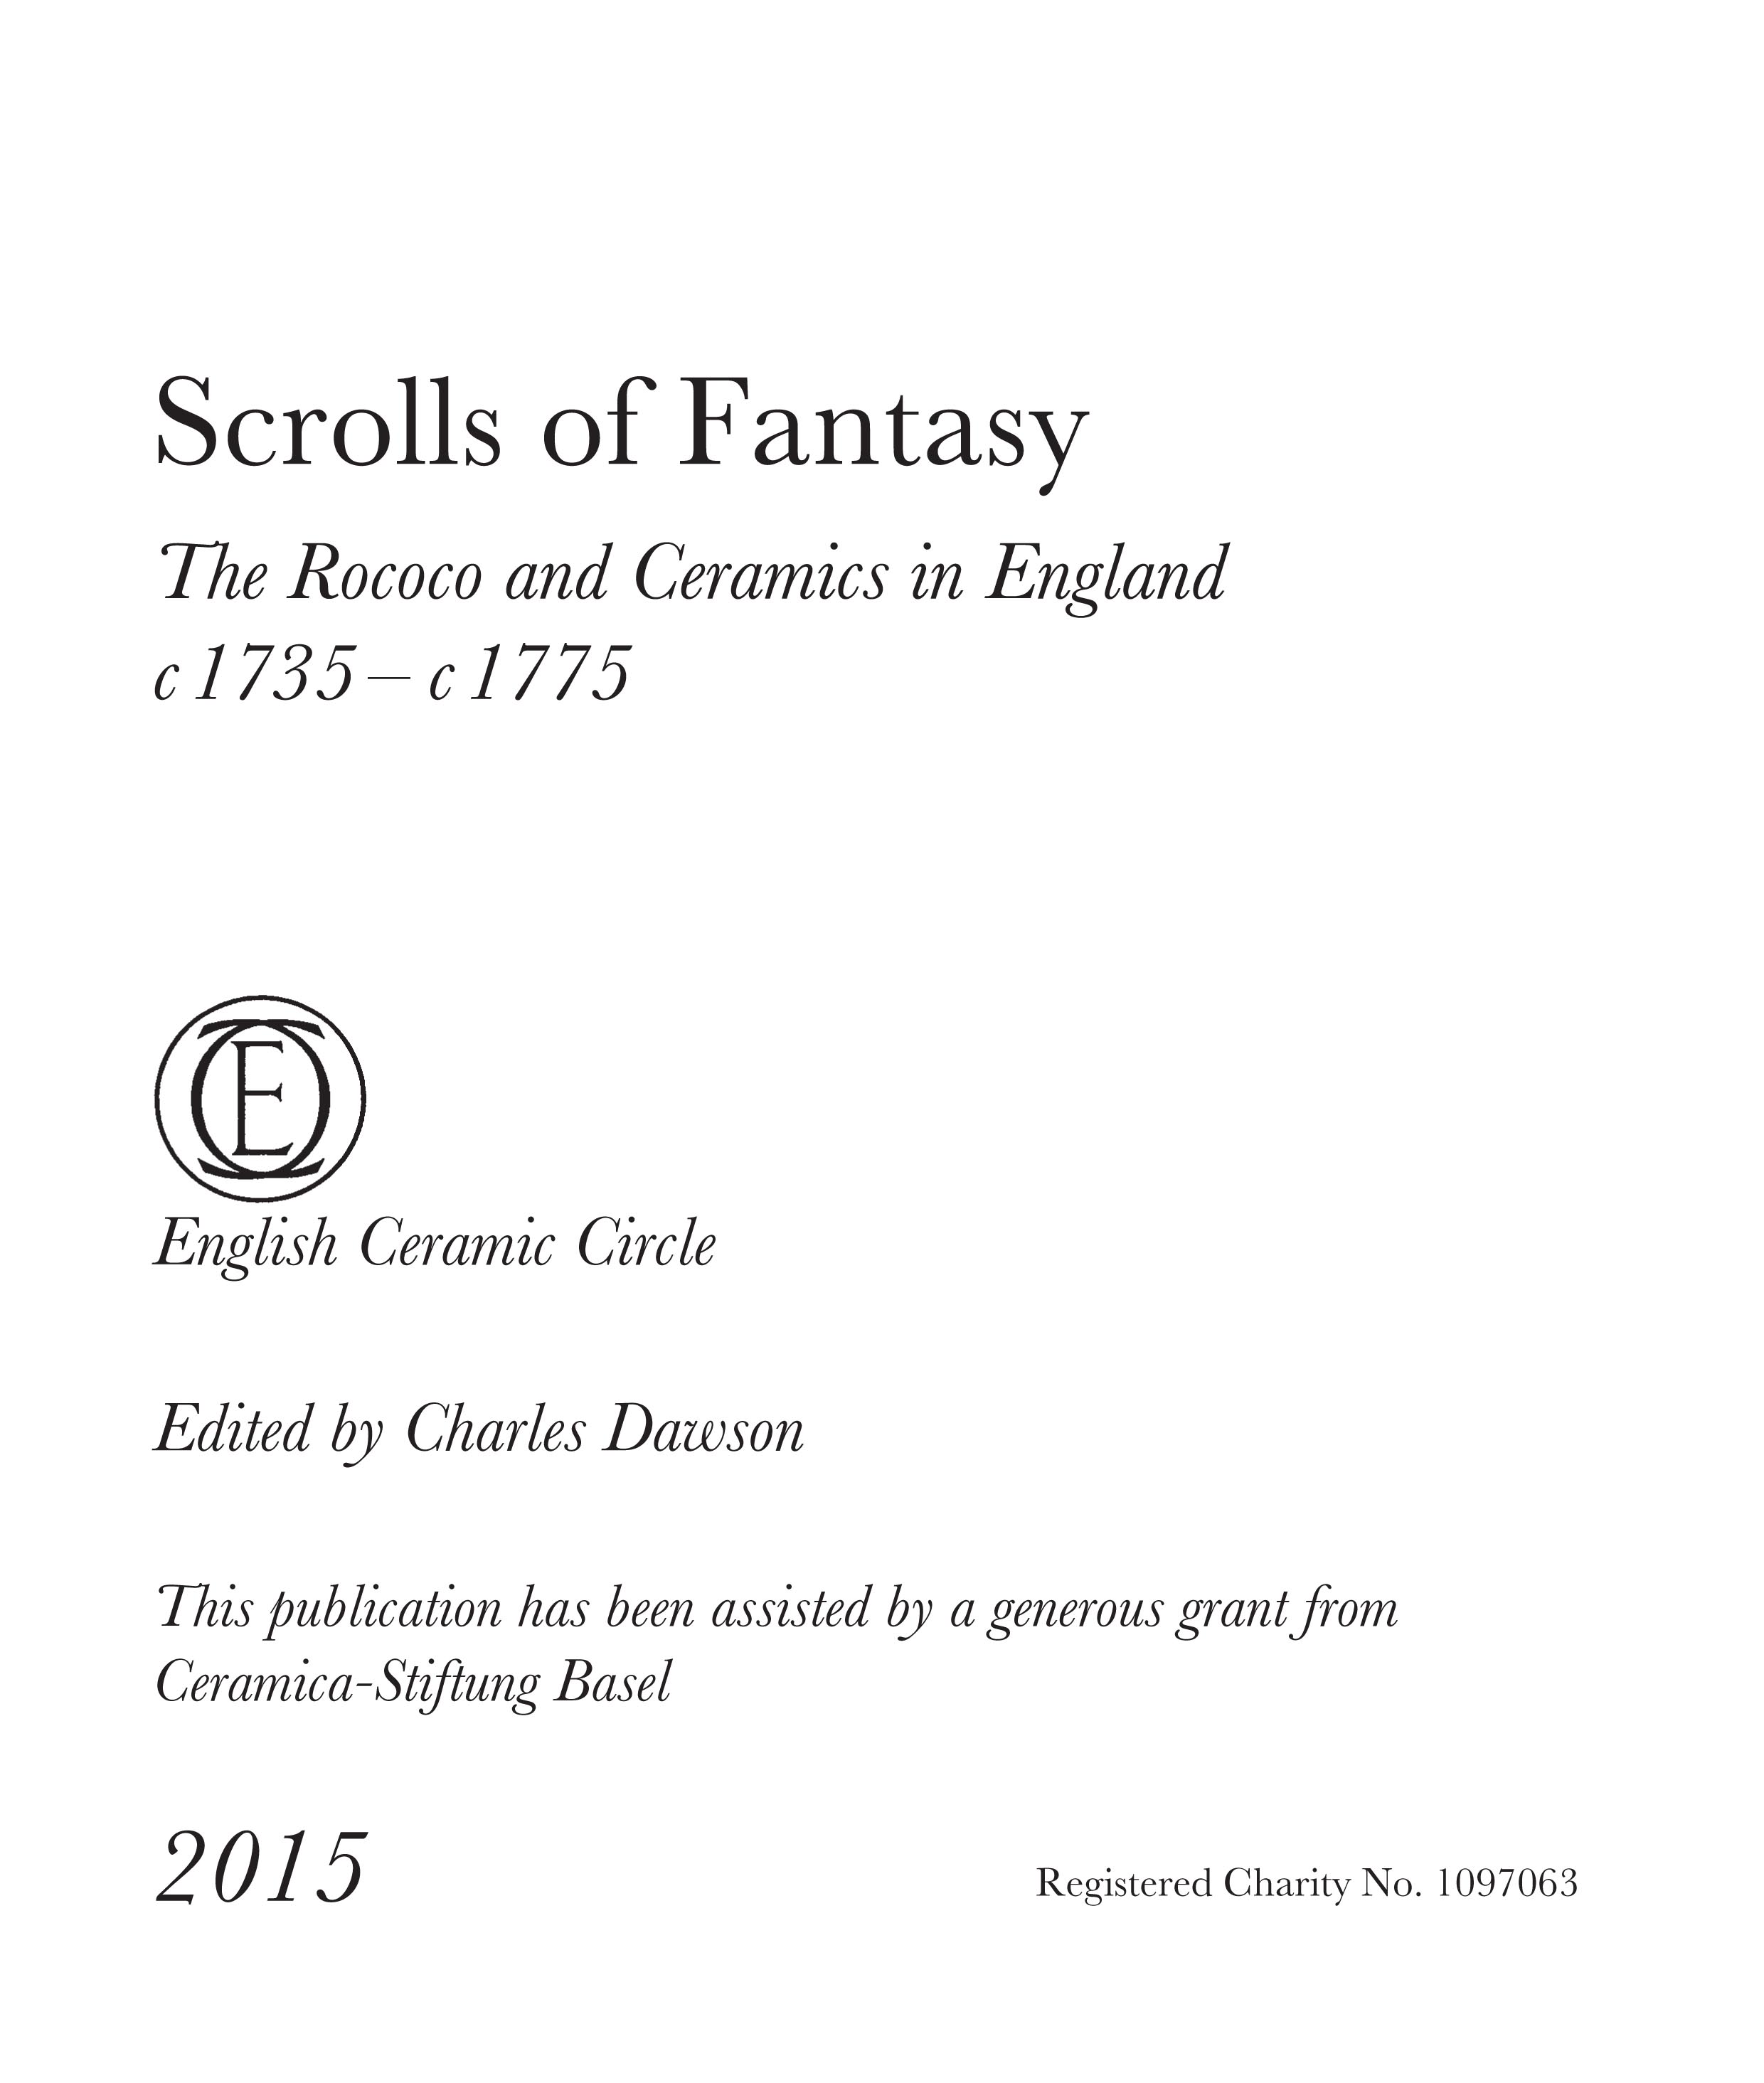 					View Scrolls of Fantasy - The Rococo and its influence on Ceramics in England, c 1735-1775
				